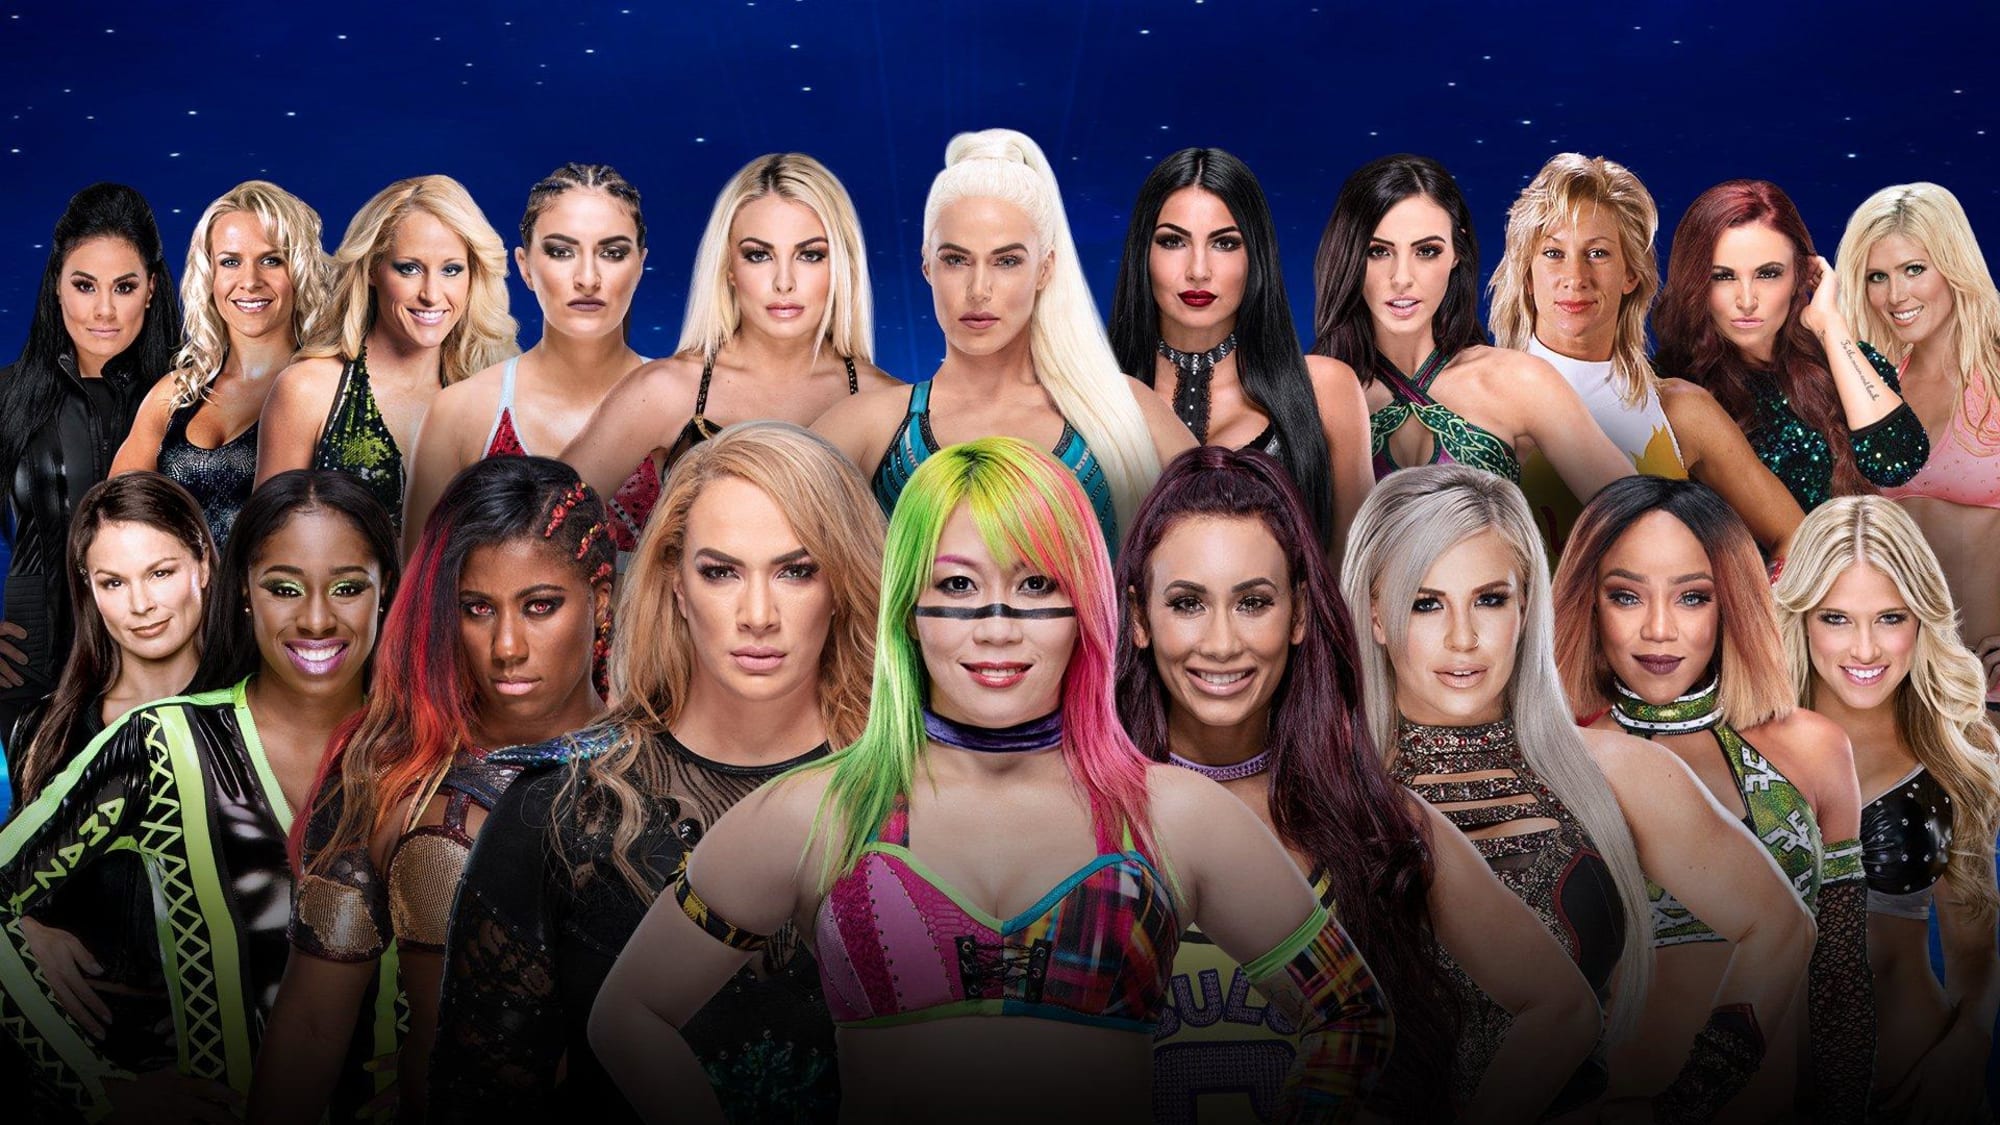 Wwe Evolution Confirmed Participants For Historic Womens Battle Royal 6544